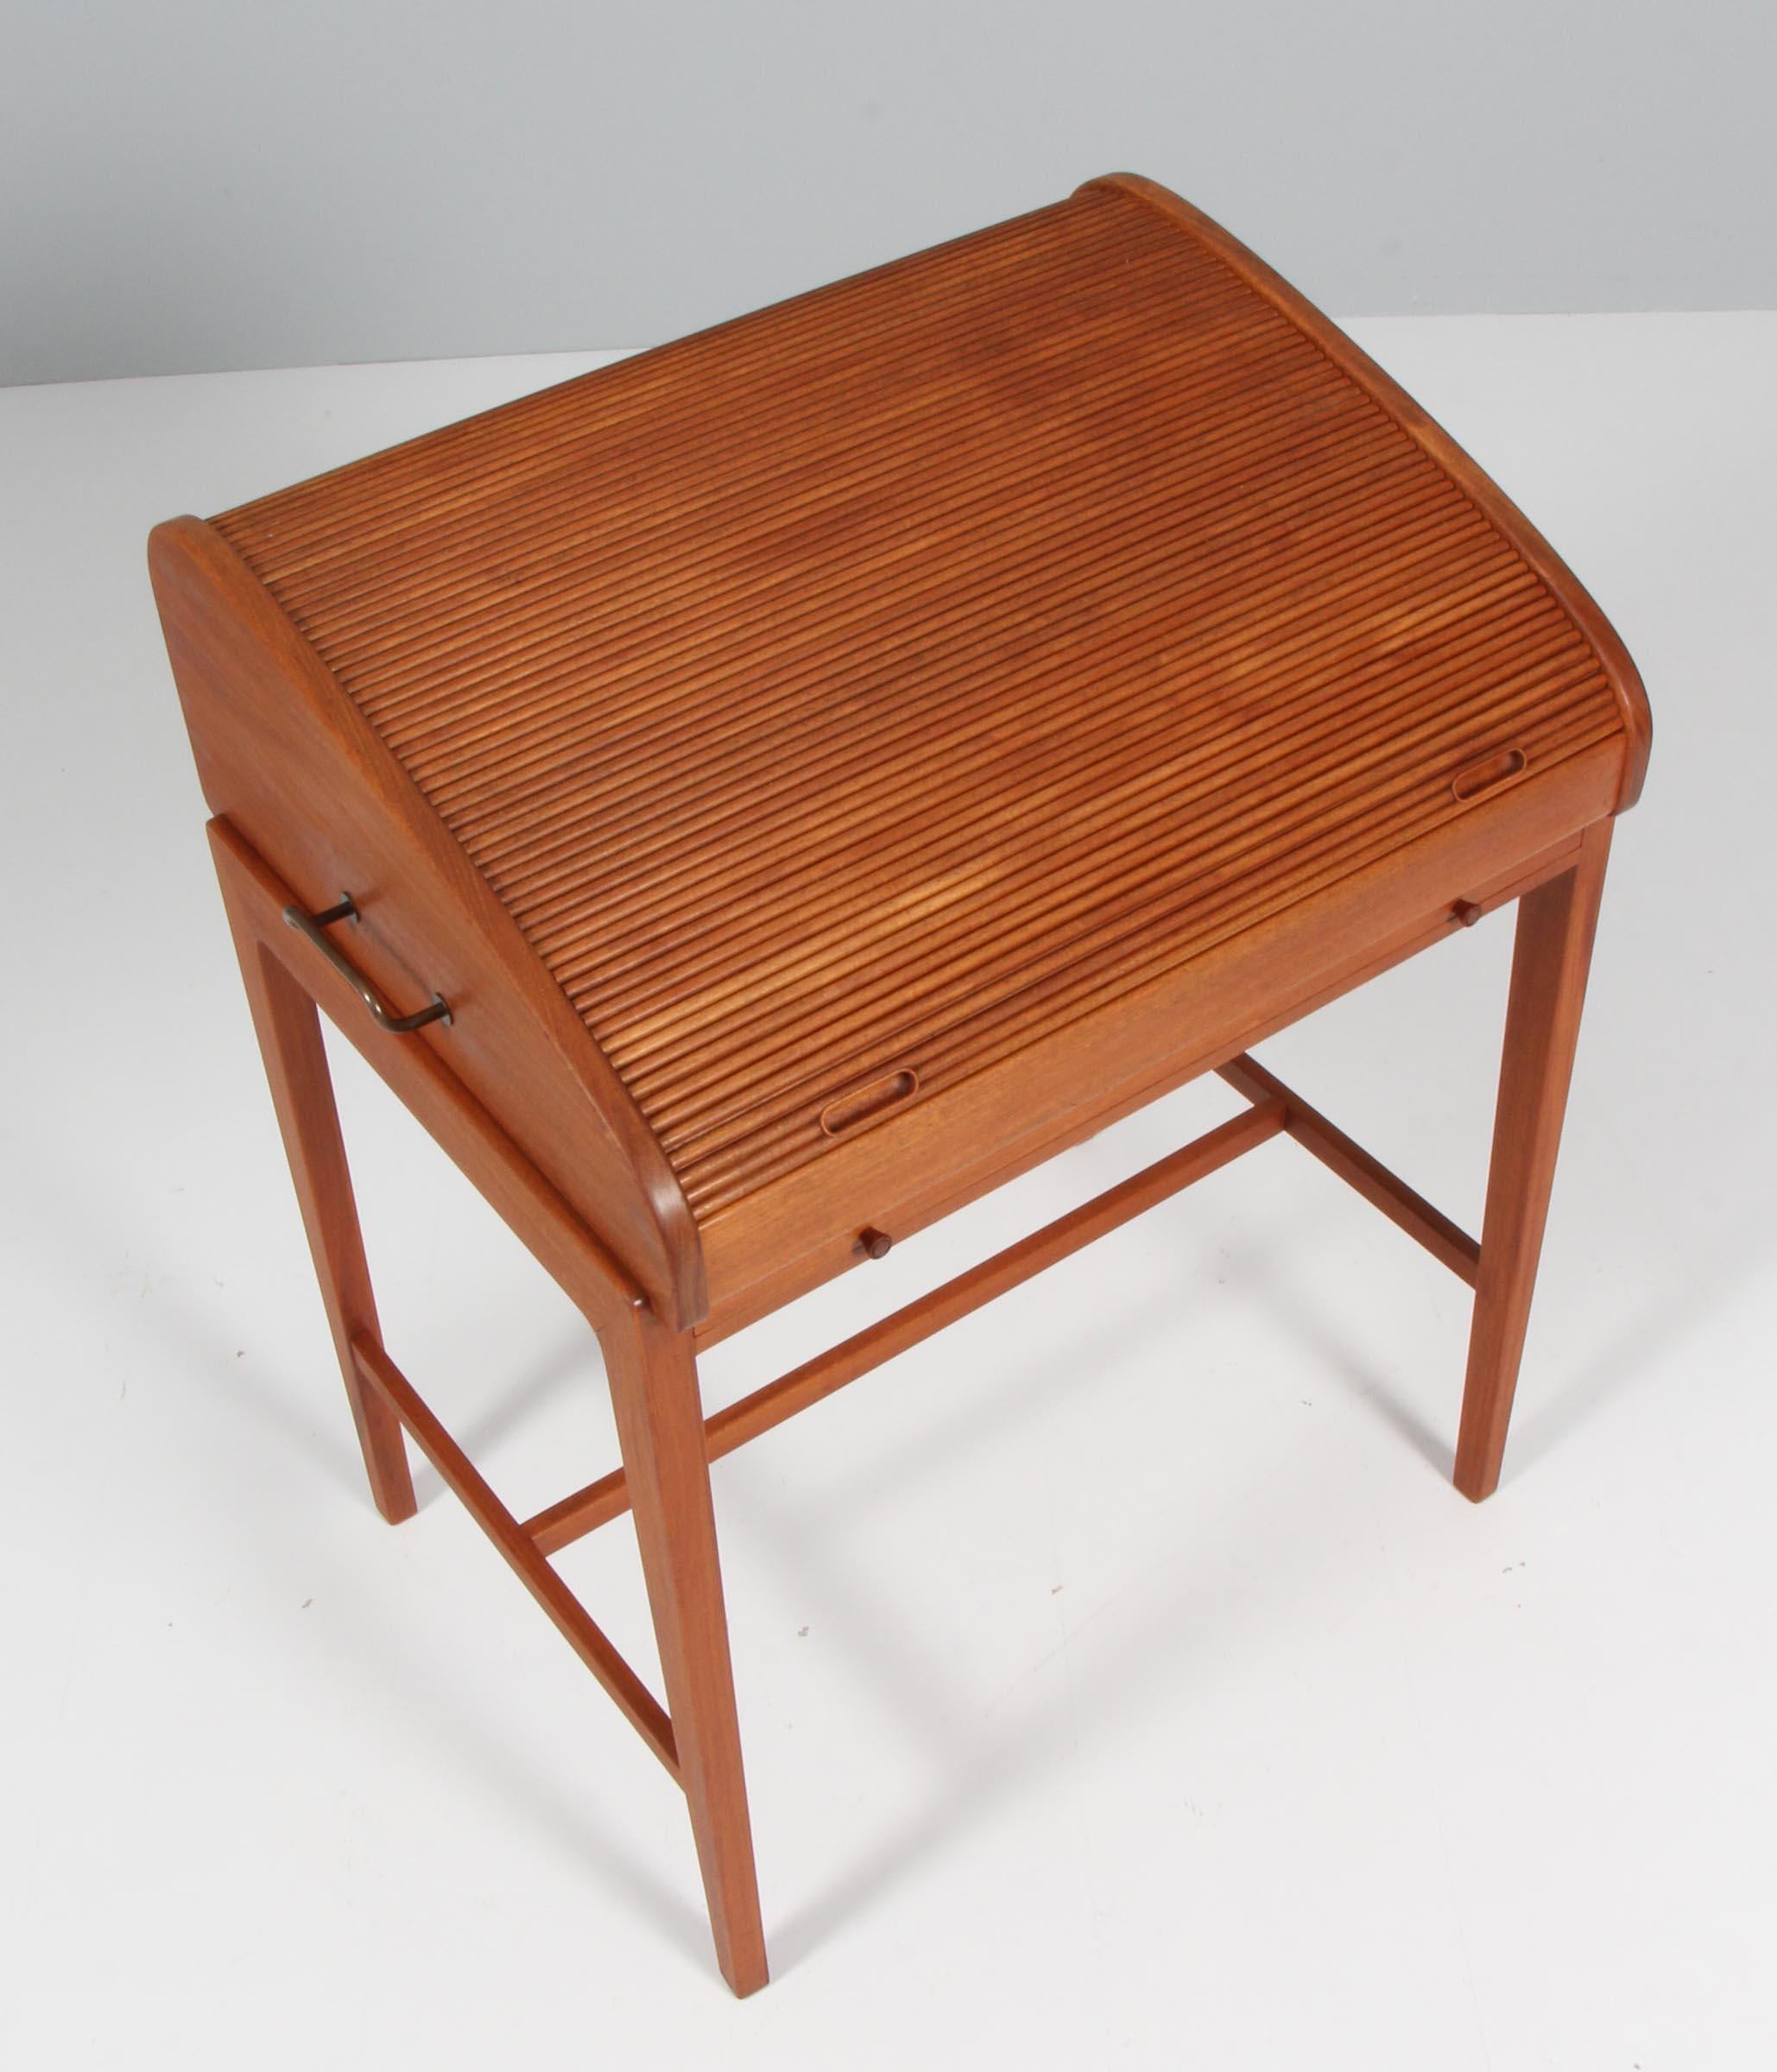 Cabinetmaker Knud Ivan Larsen journeyman graduation piece, sewing nest in maple and Perupa Rosa. With tambourine door with different fittings underneath for sewing. Brass handles on the side.
The table was awarded with a silver medal from the